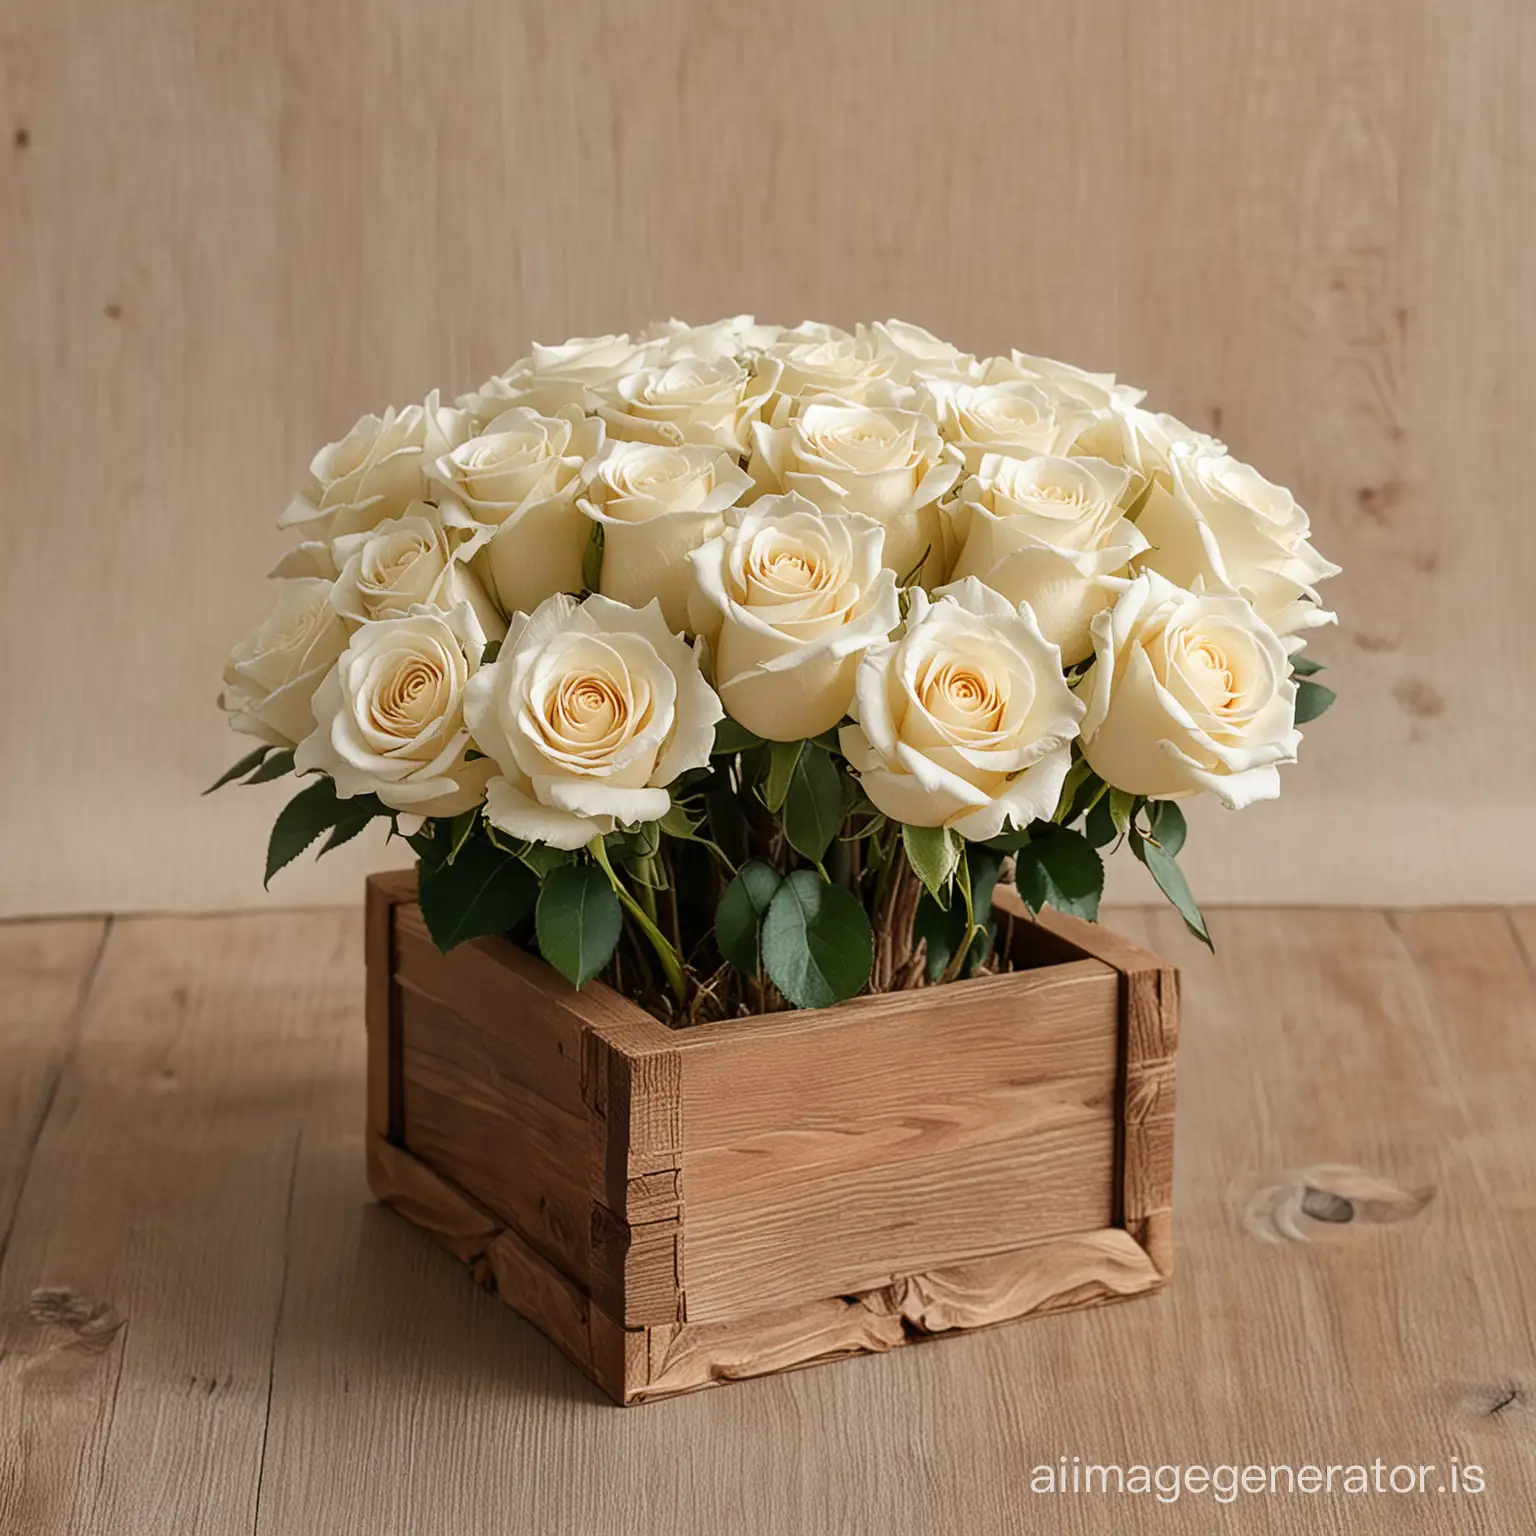 a display of short stemmed ivory roses in a rustic, wood square box vase for a rustic wedding centerpiece